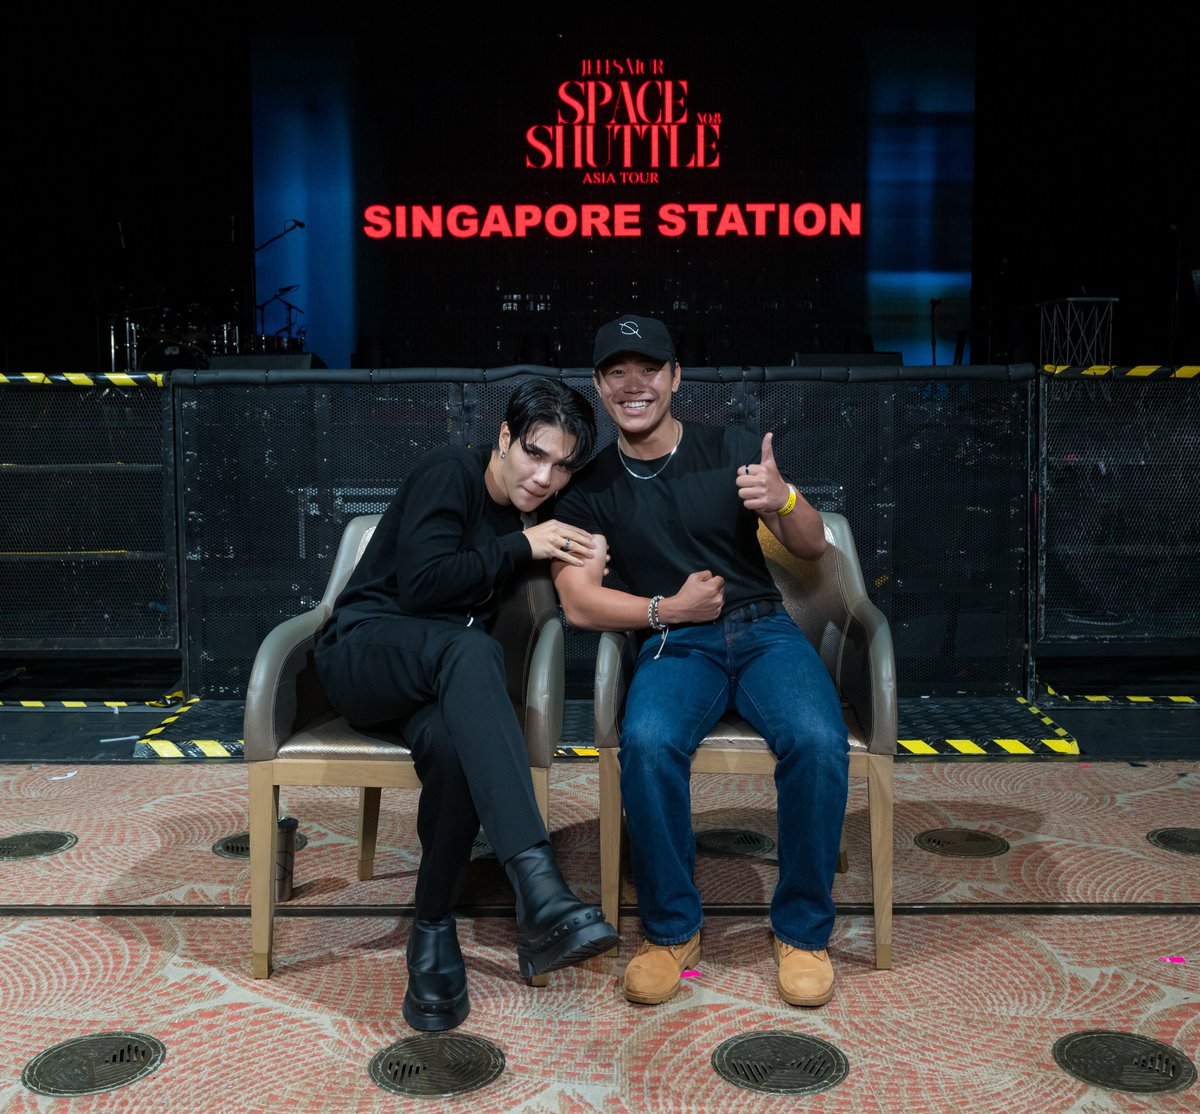 Jeff: So what do you want me to do?
Me: Hold my biceps.
Jeff: Okay!

Hahahhahaahah! His cheeky face is priceless. 
@jeffsatur #jeffsatur 
#JeffsaturSS8Singapore 
#JeffSaturSpaceShuttleNo8